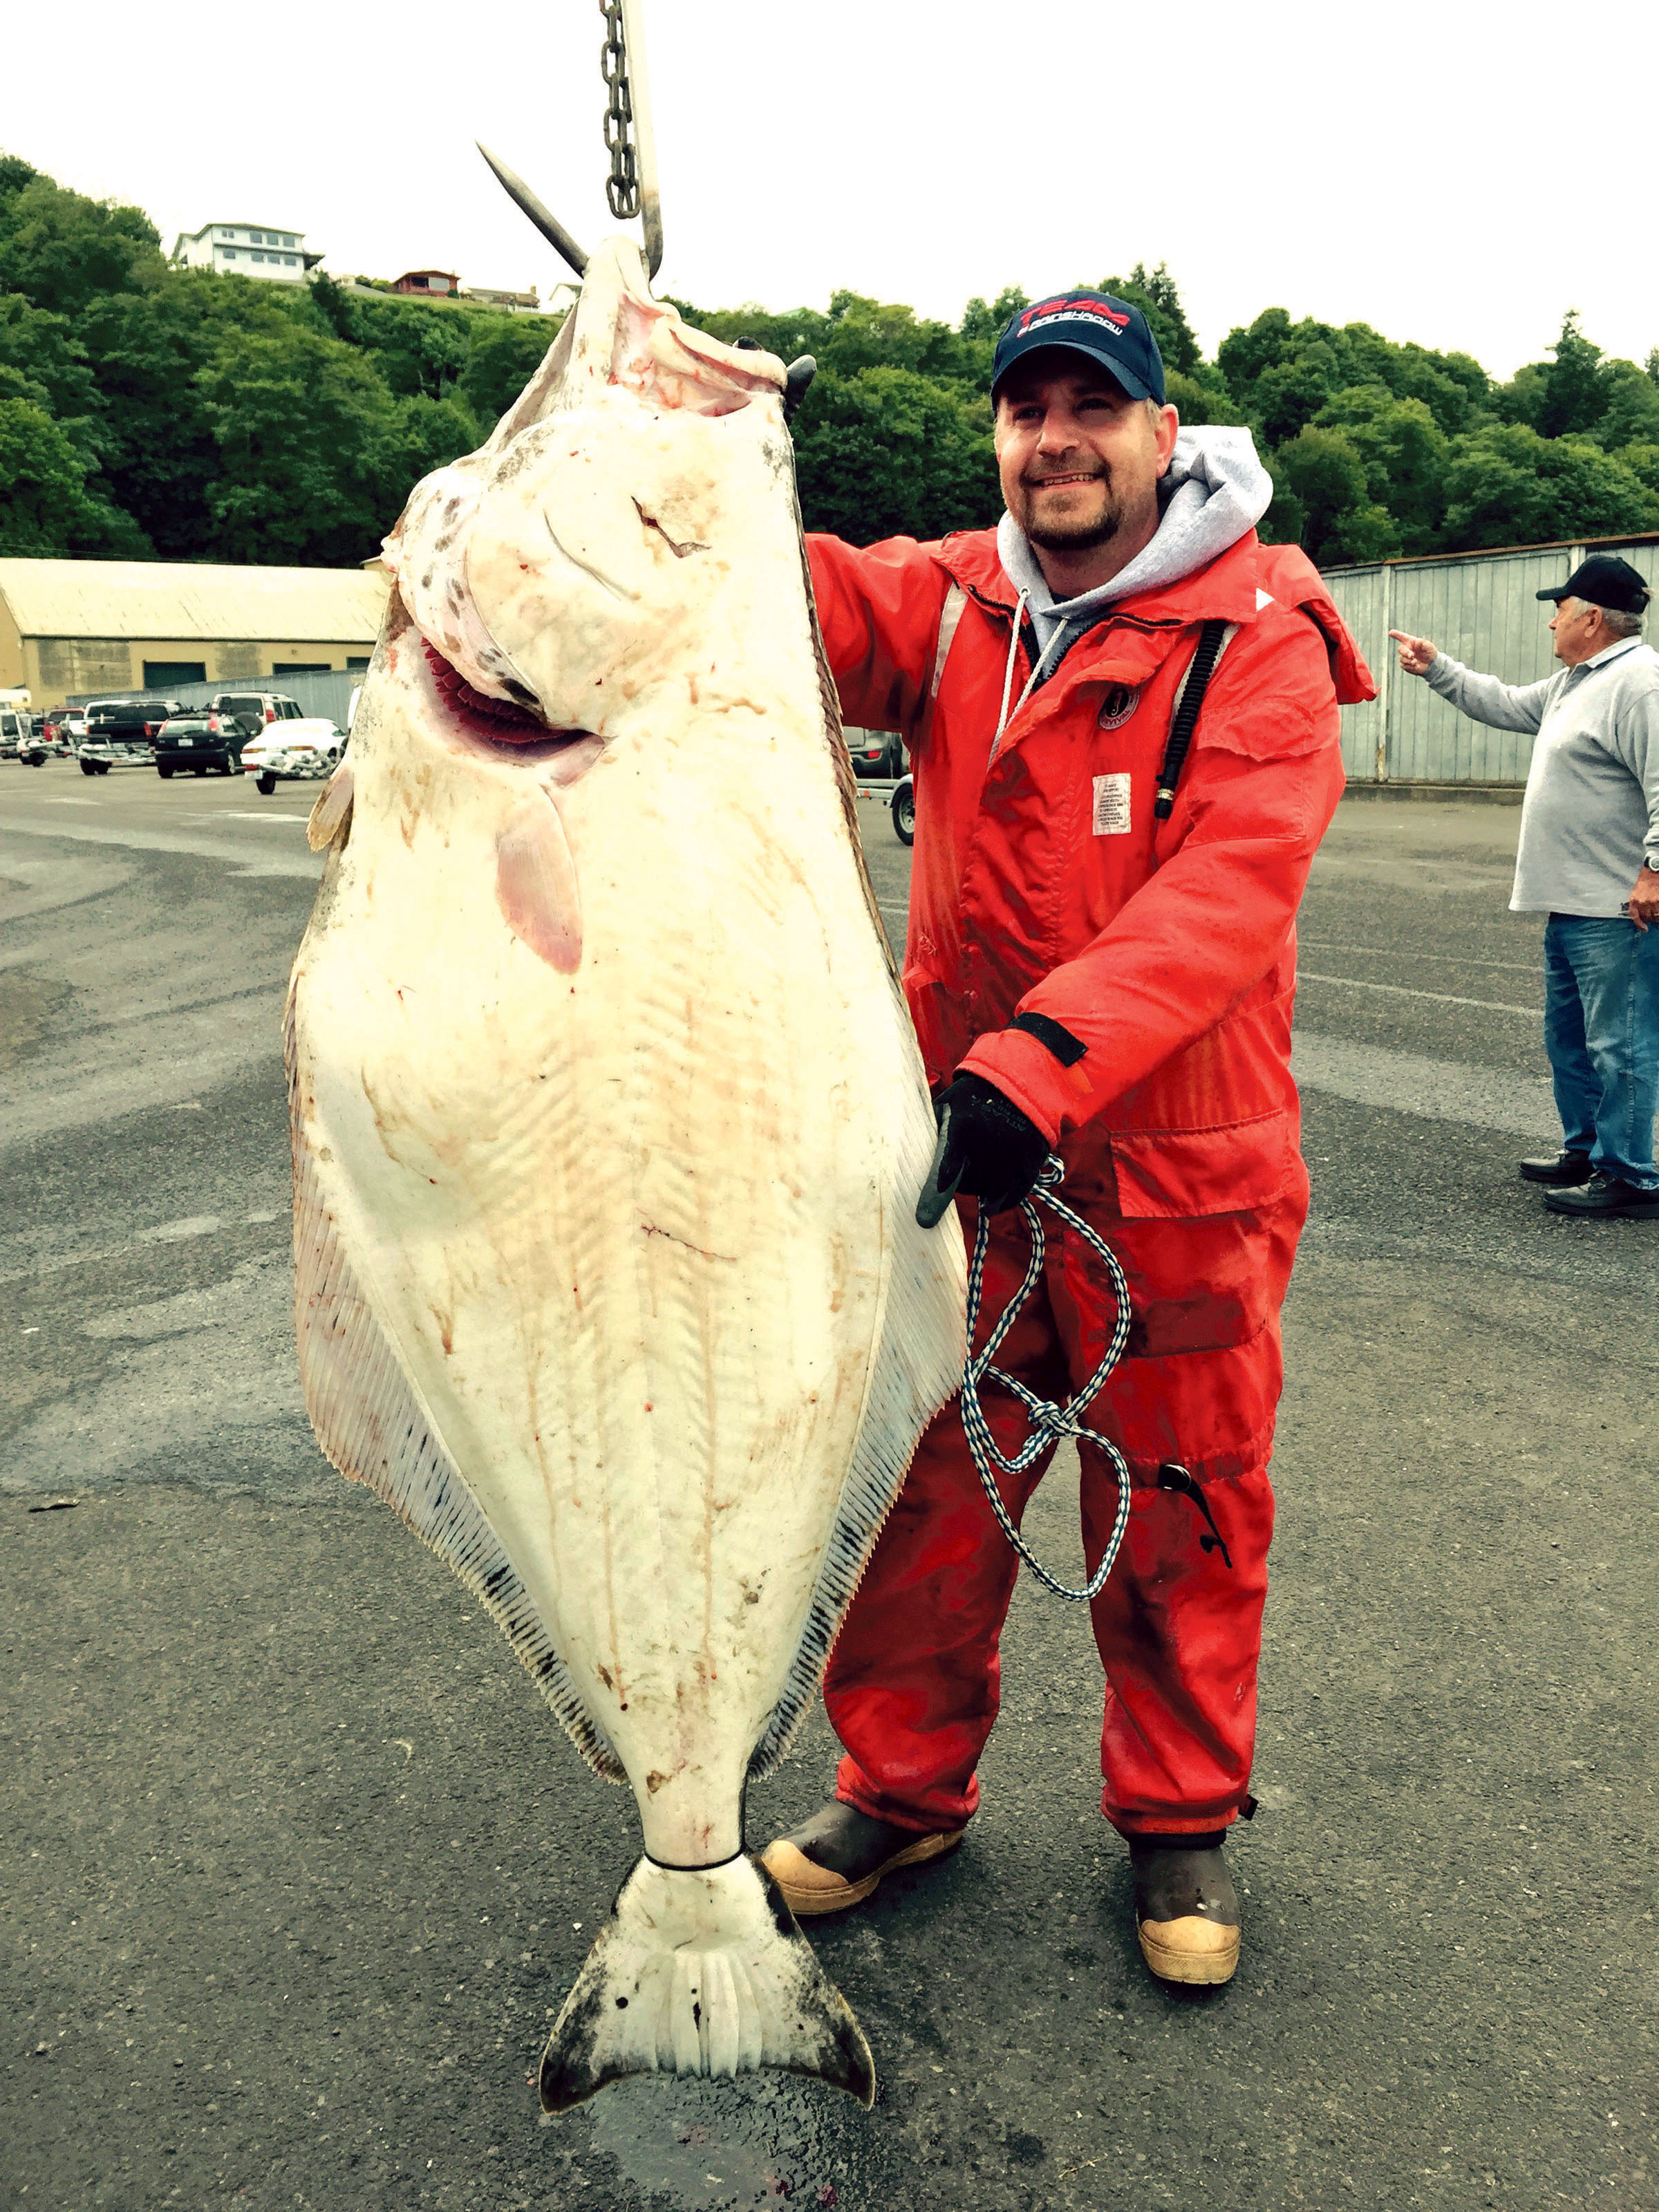 Port Angeles' Josh Constant landed this 107.9-pound halibut in Freshwater Bay. He leads the Port Angeles Salmon Club's 15th annual Halibut Derby entering today's final round. (Lee Hancock/Port Angeles Salmon Club)